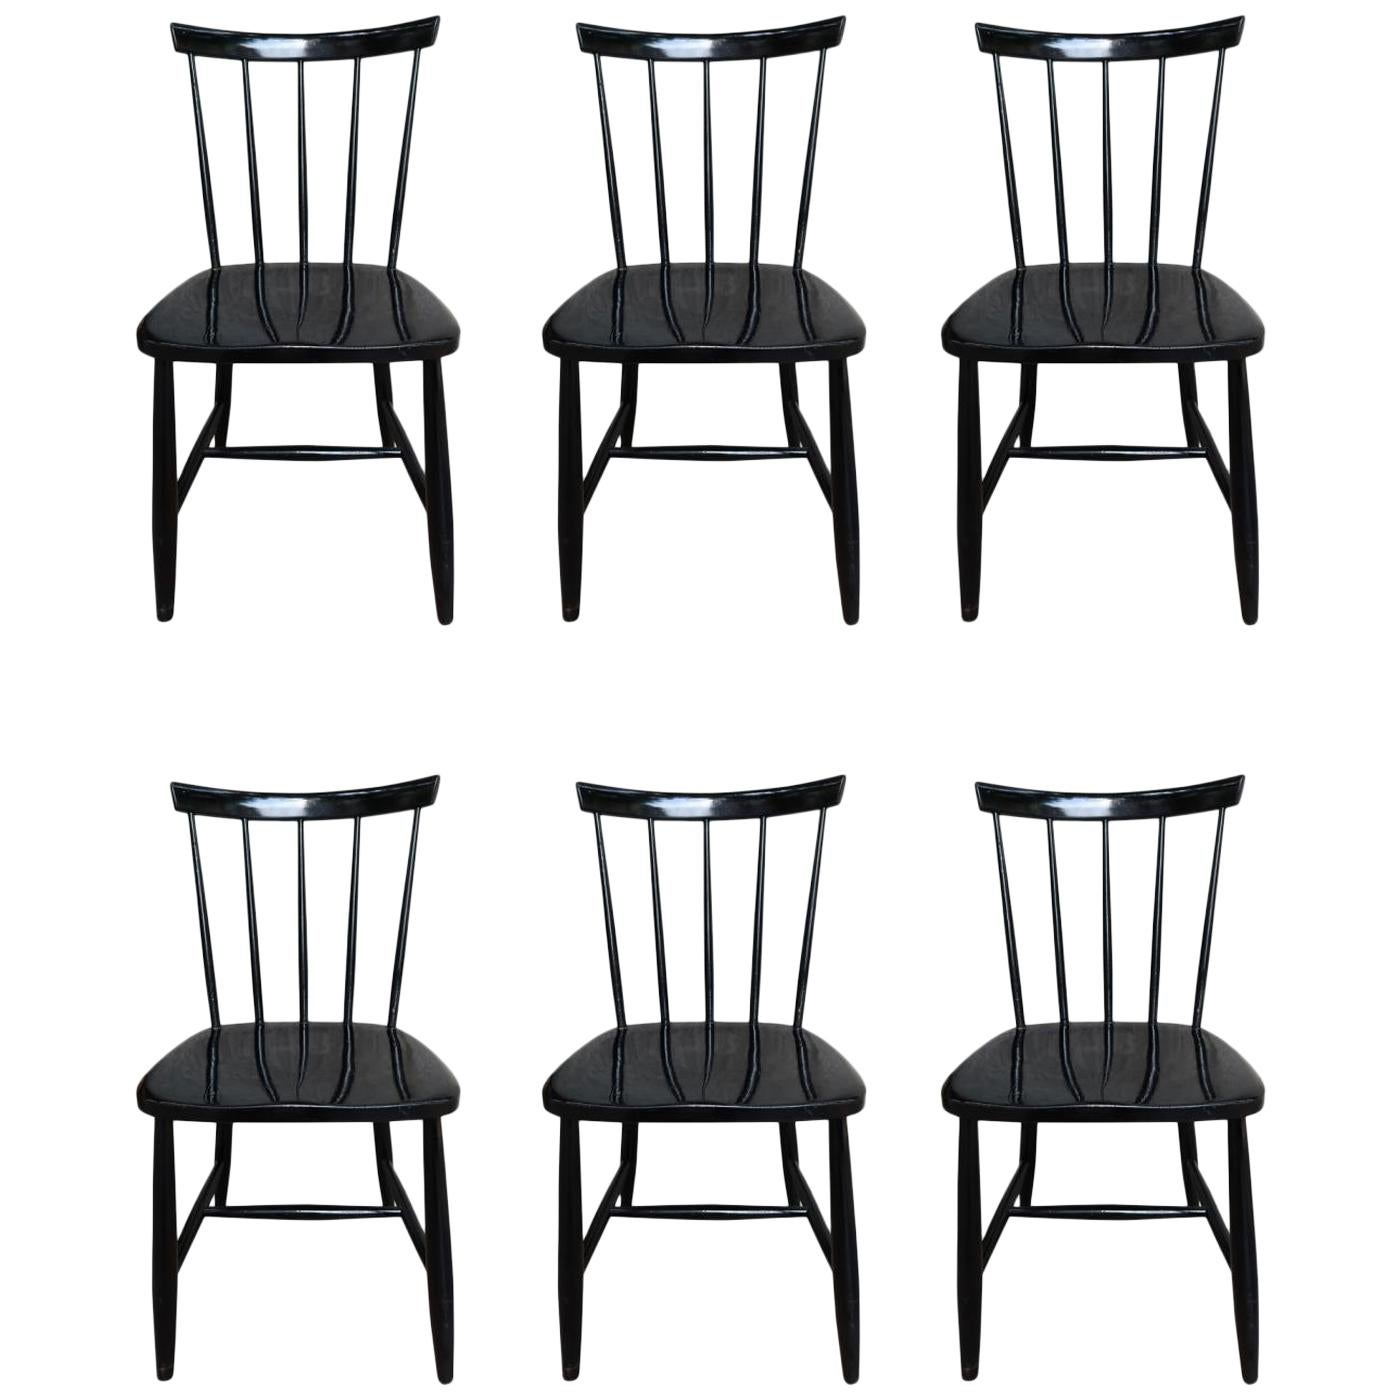 Ilmari Tapiovaara, 6 White Lacquered Chairs, Haga Fors Production, Finland, 1950 For Sale